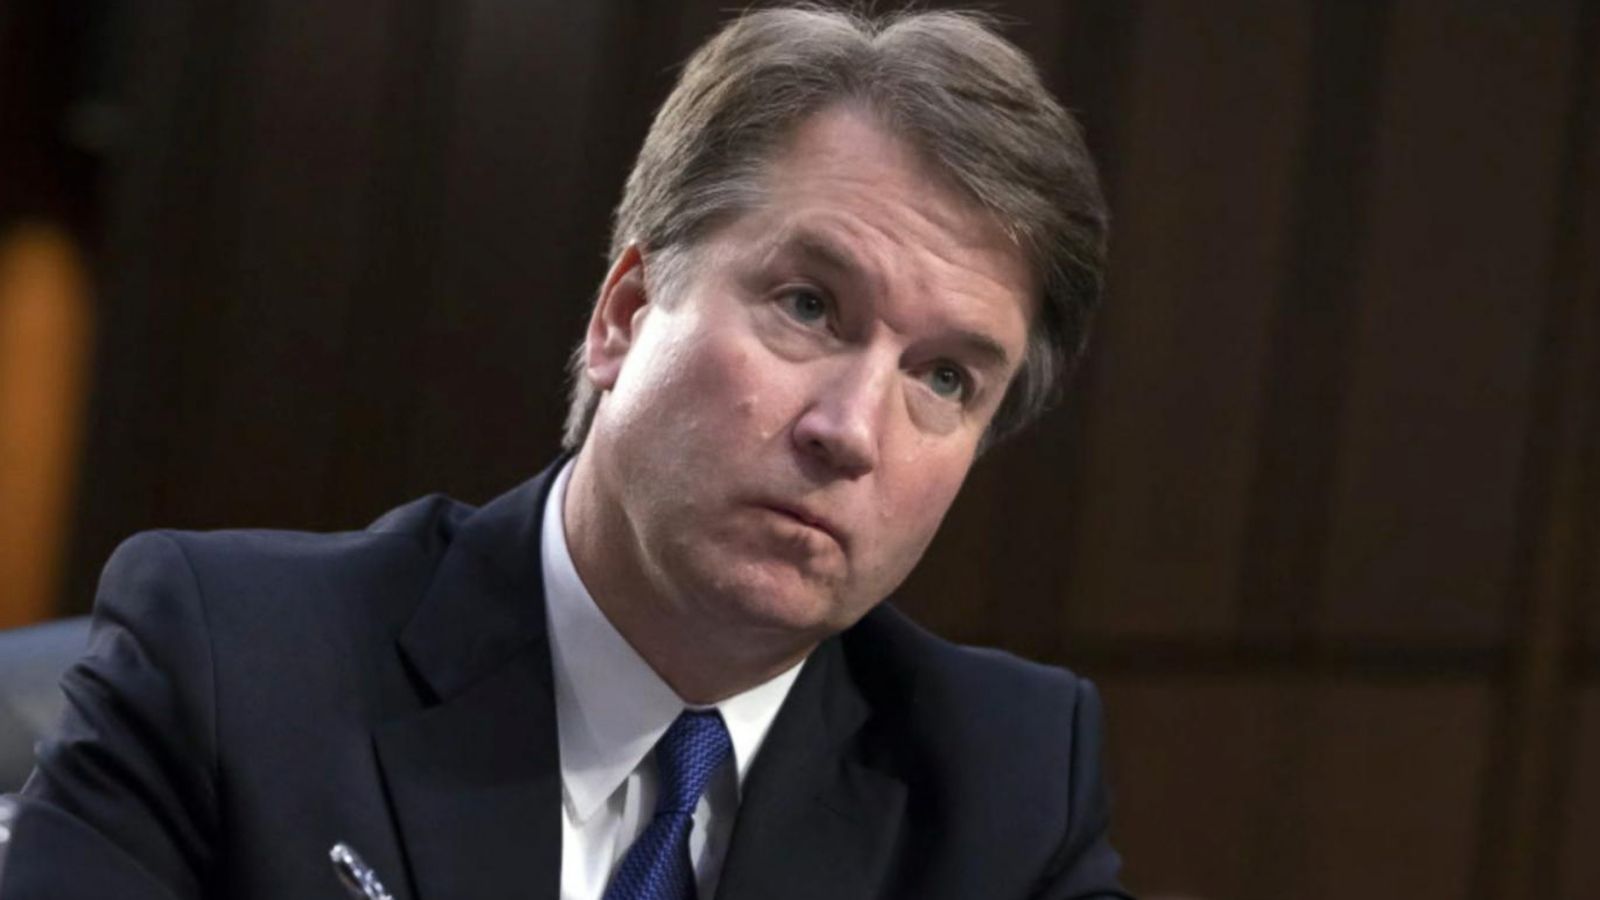 What Brett Kavanaugh Sexual Assault Allegations Could Mean For Nominee